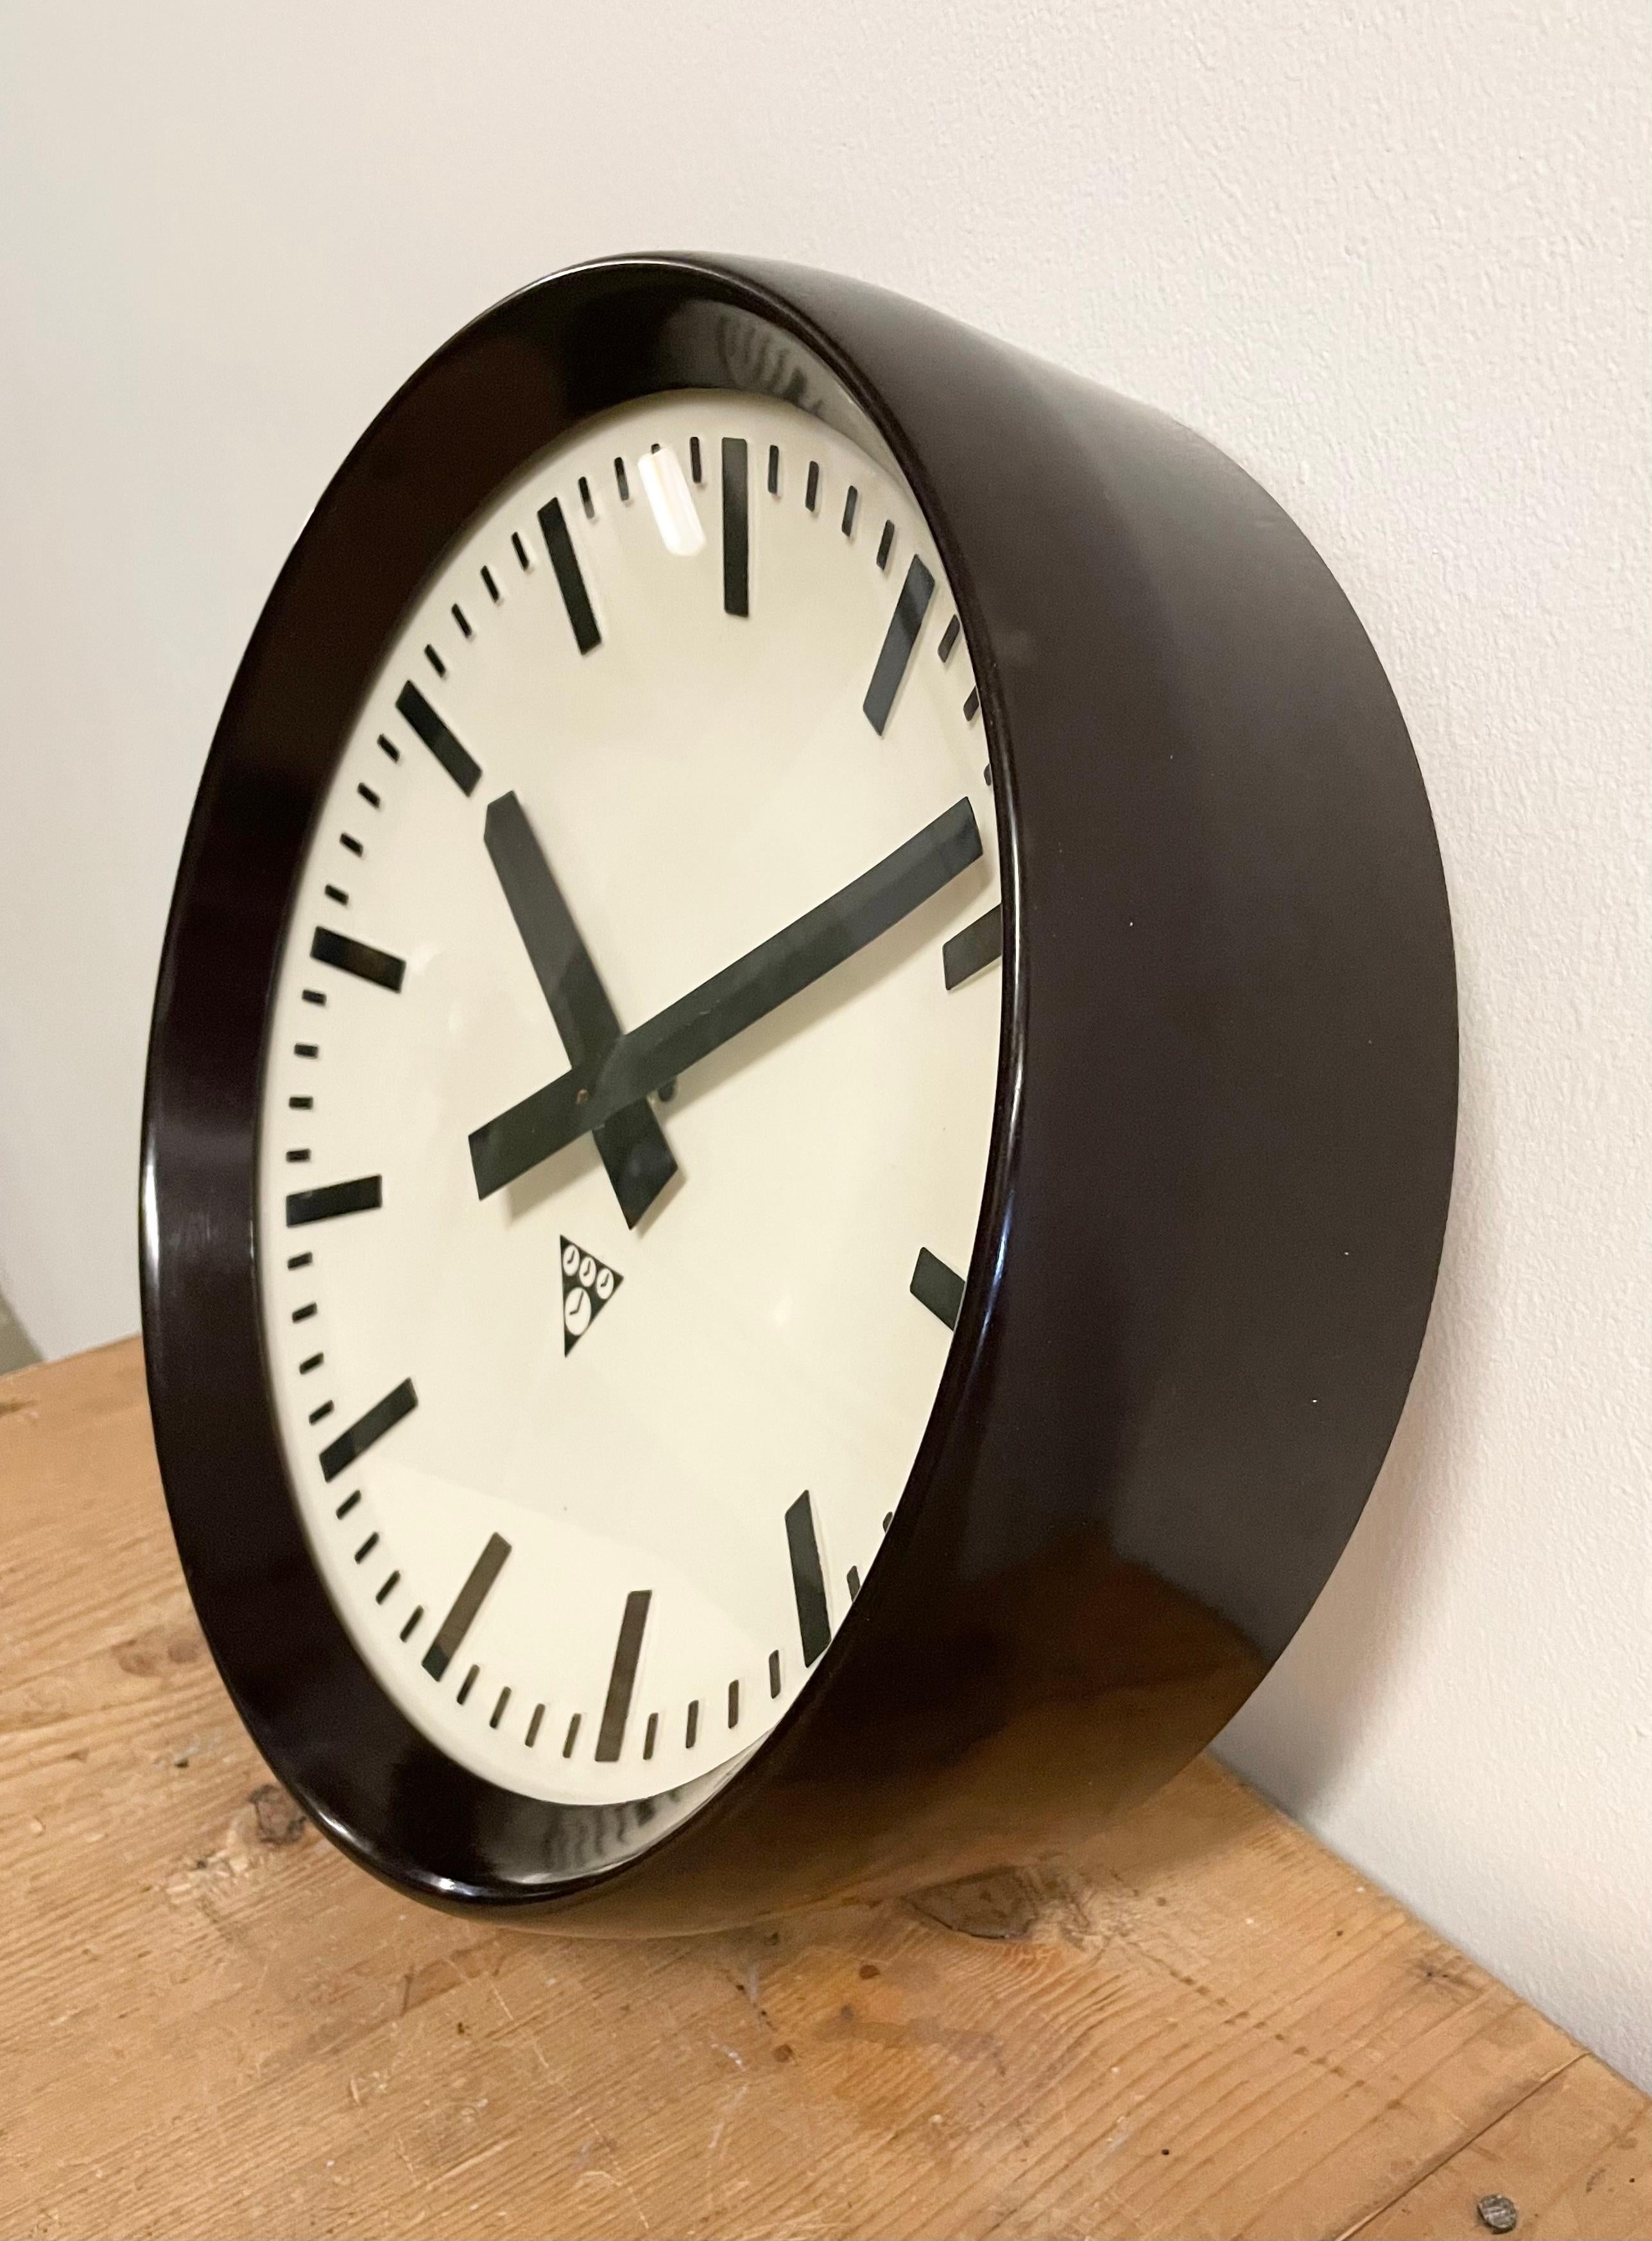 This wall clock was produced by Pragotron in former Czechoslovakia during the 1960s. The piece features a brown bakelite frame, white bakelite dial, aluminum hands and a curved clear glass cover. The piece has been converted into a battery-powered